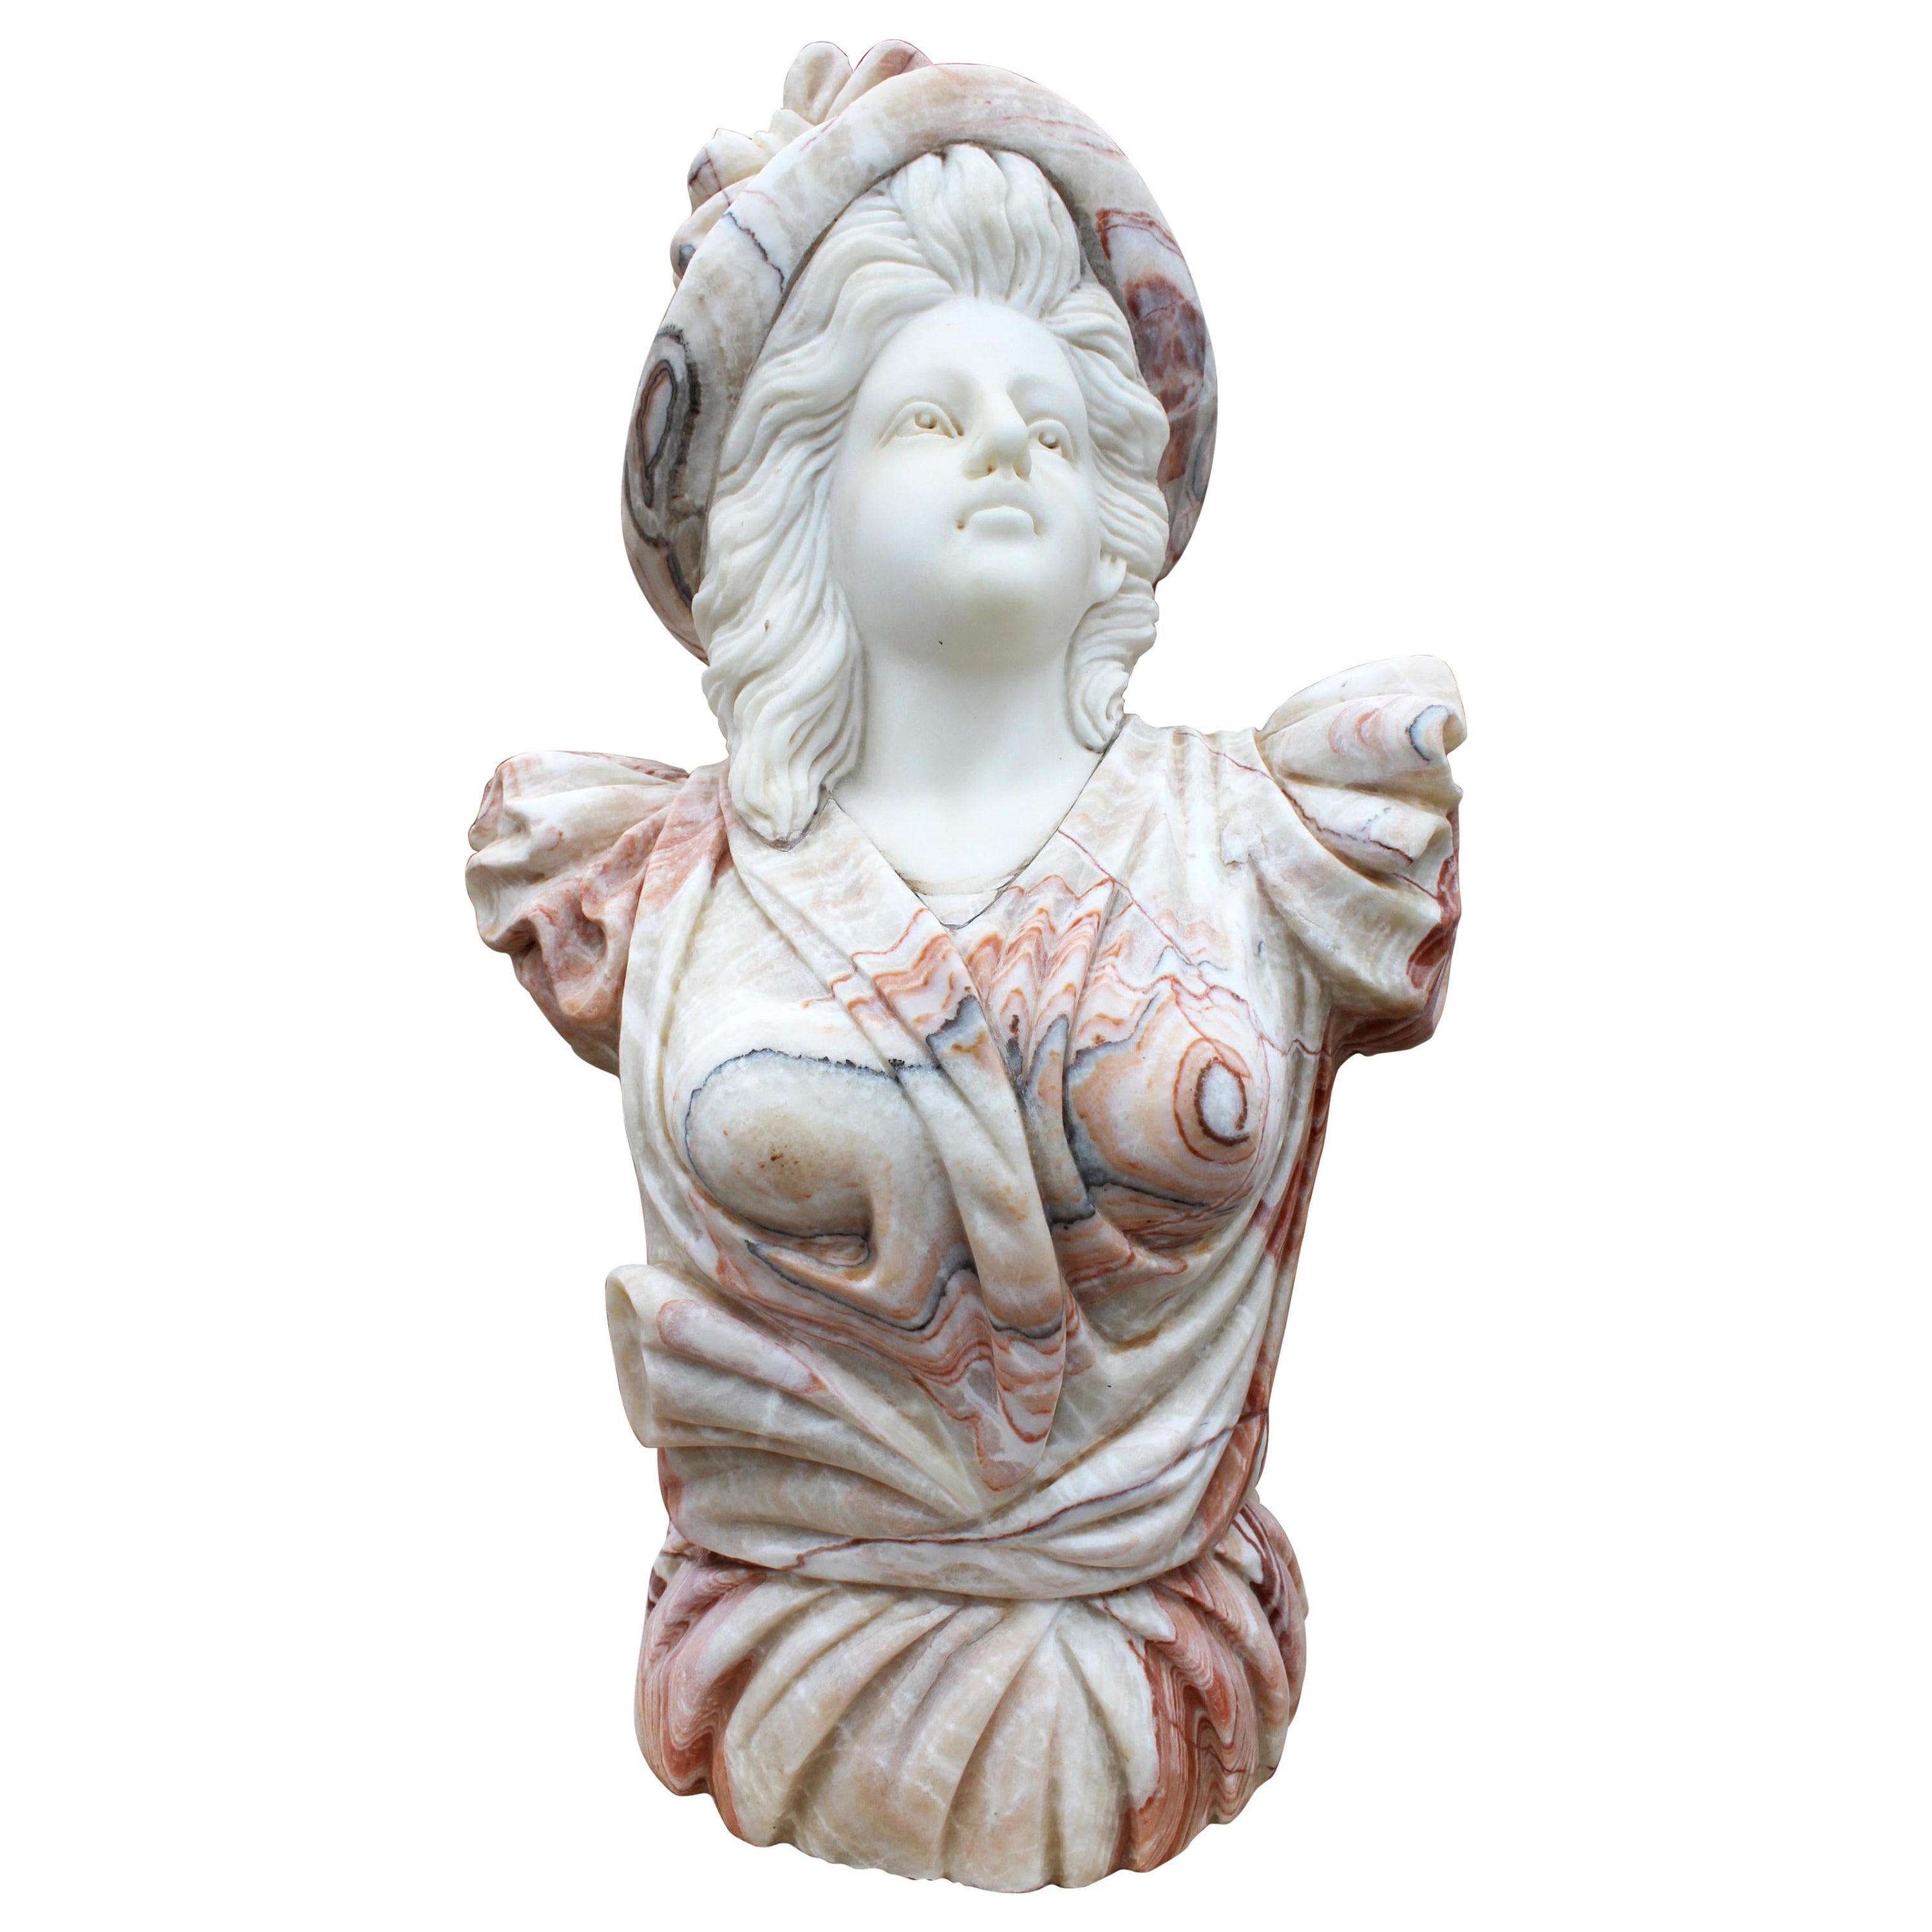 Hand Carved White Carrara Marble and Onyx Bust of a Romanticist Woman